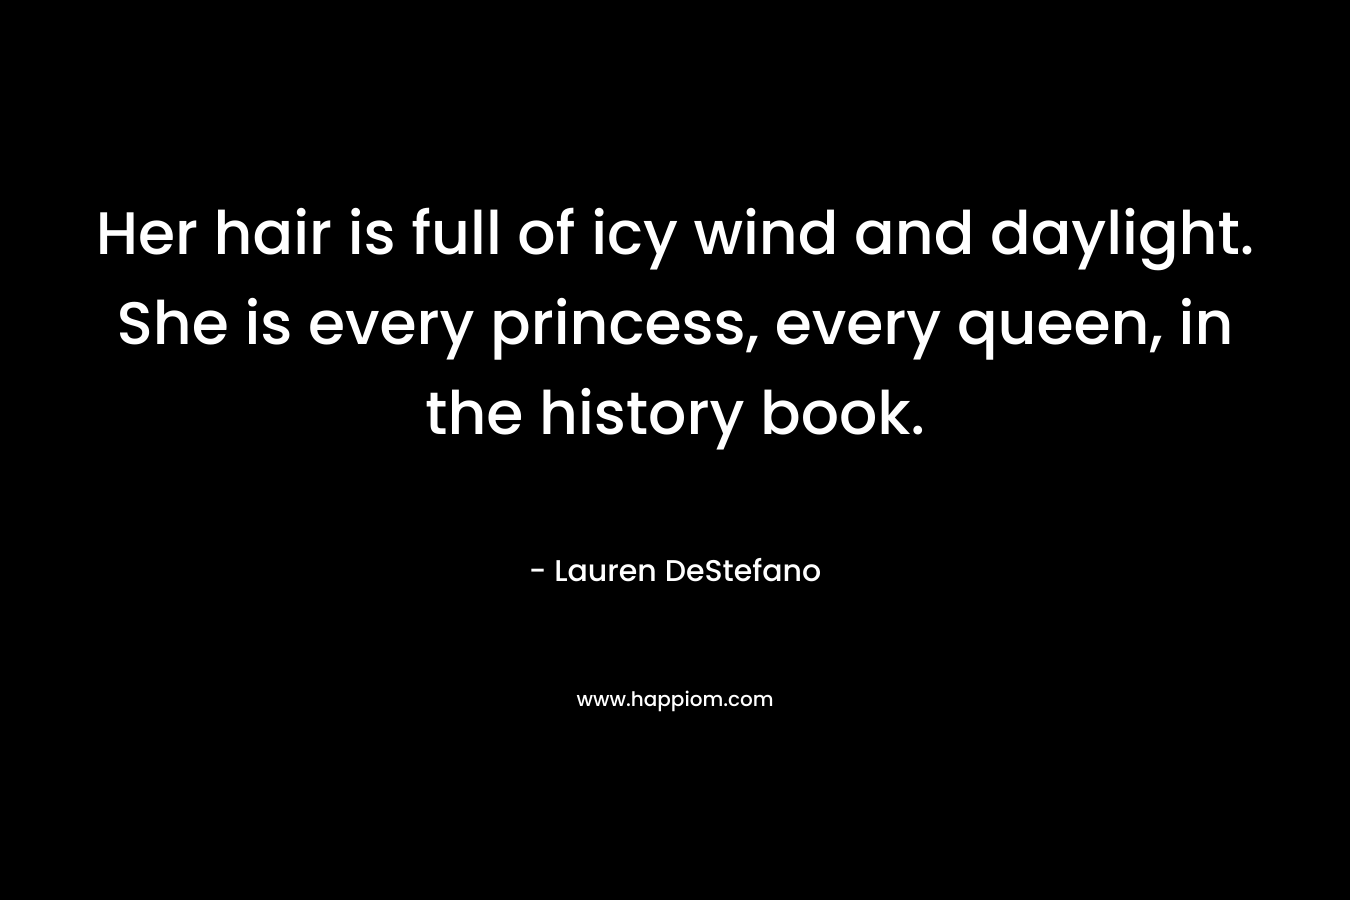 Her hair is full of icy wind and daylight. She is every princess, every queen, in the history book. – Lauren DeStefano